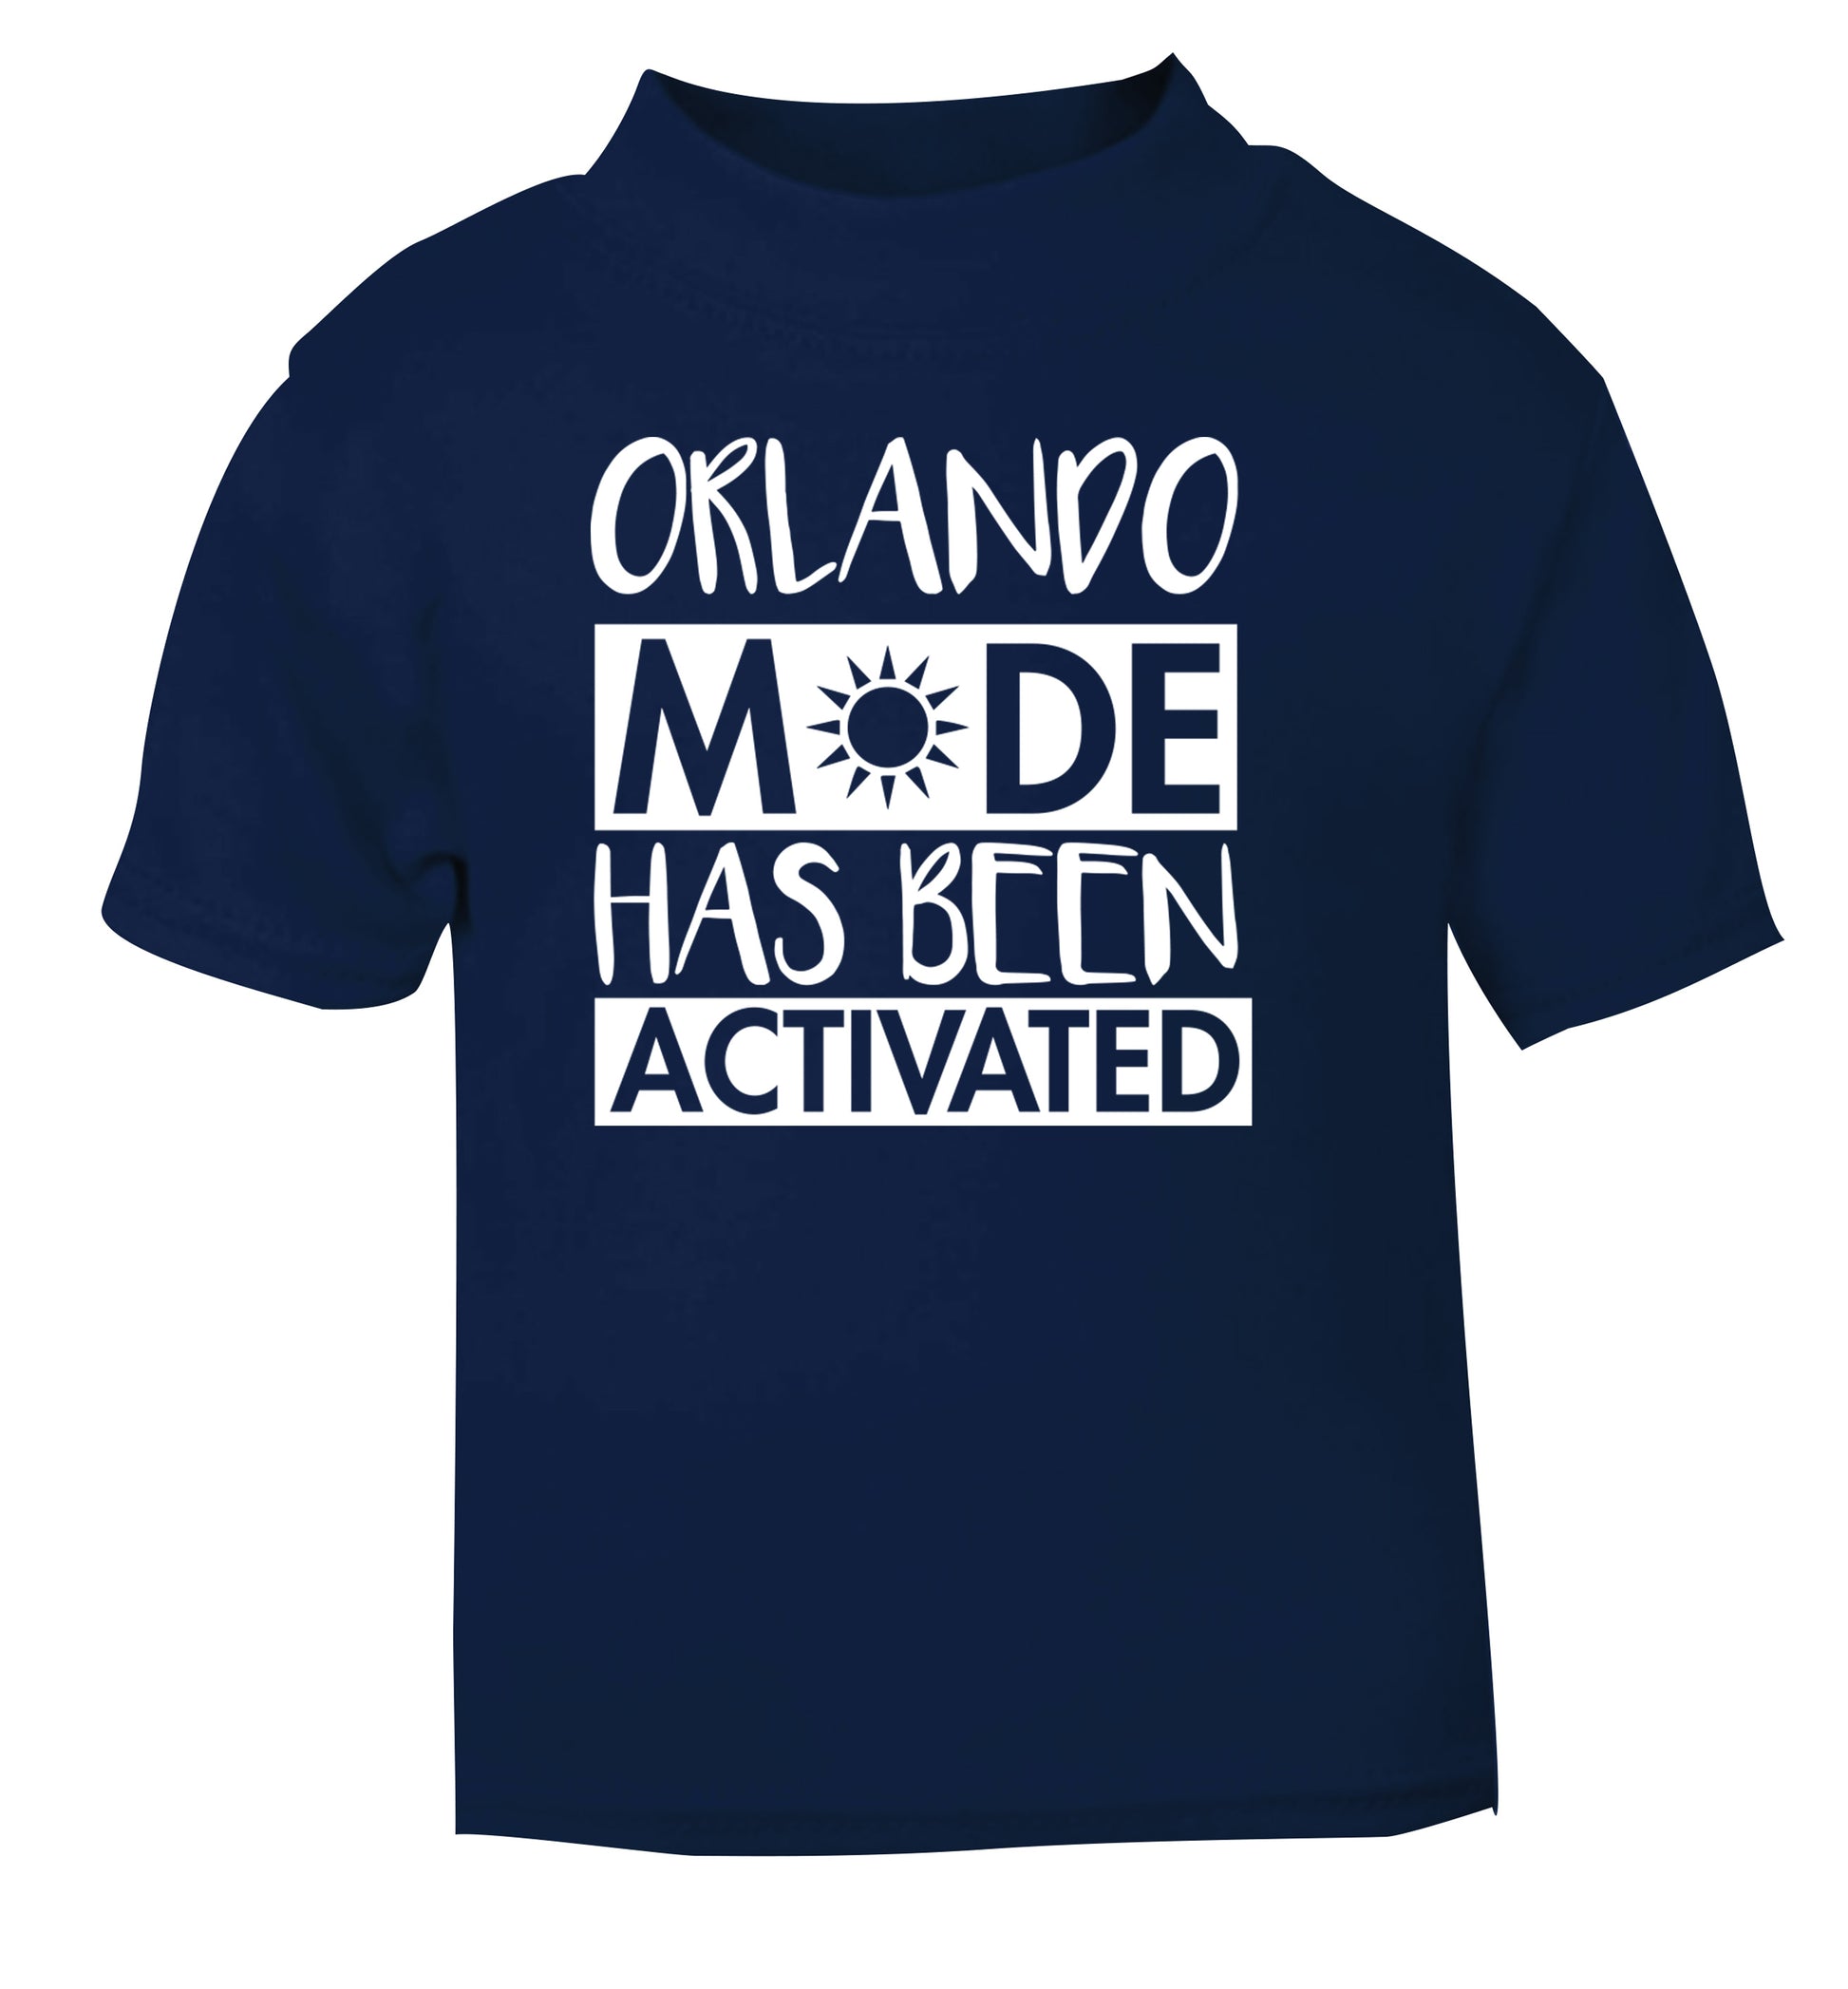 Orlando mode has been activated navy Baby Toddler Tshirt 2 Years